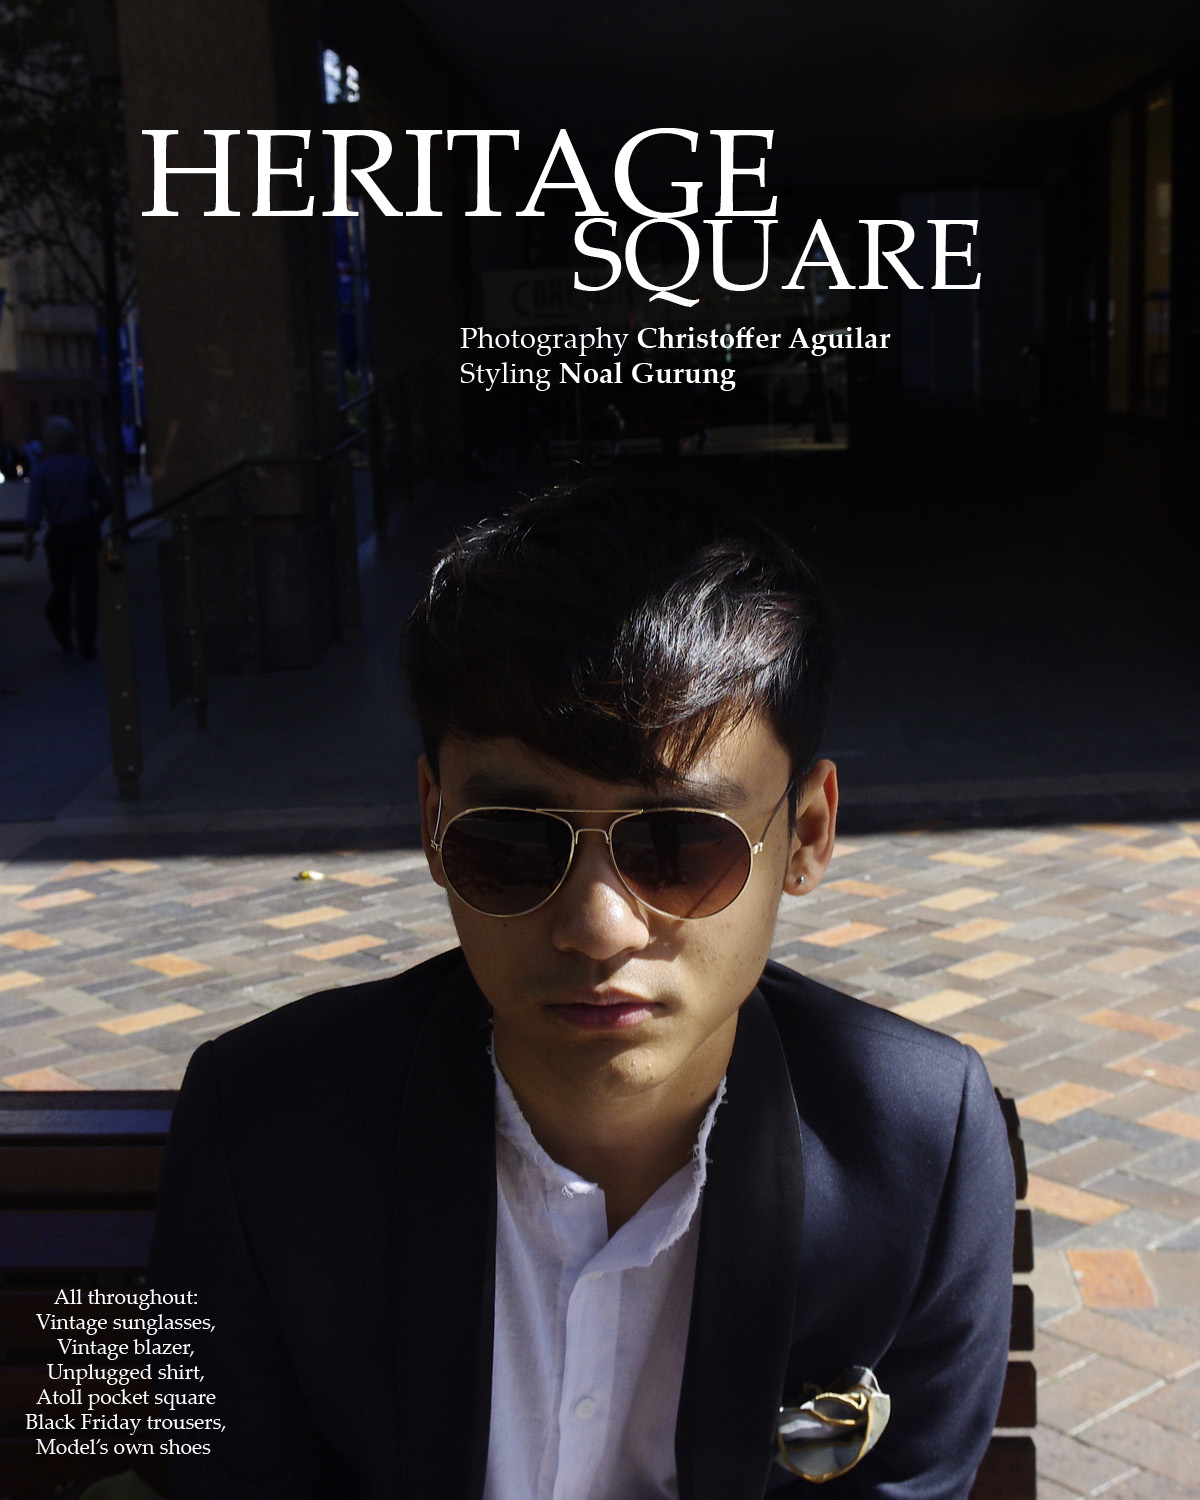 "Heritage Square" by Christoffer Aguilar